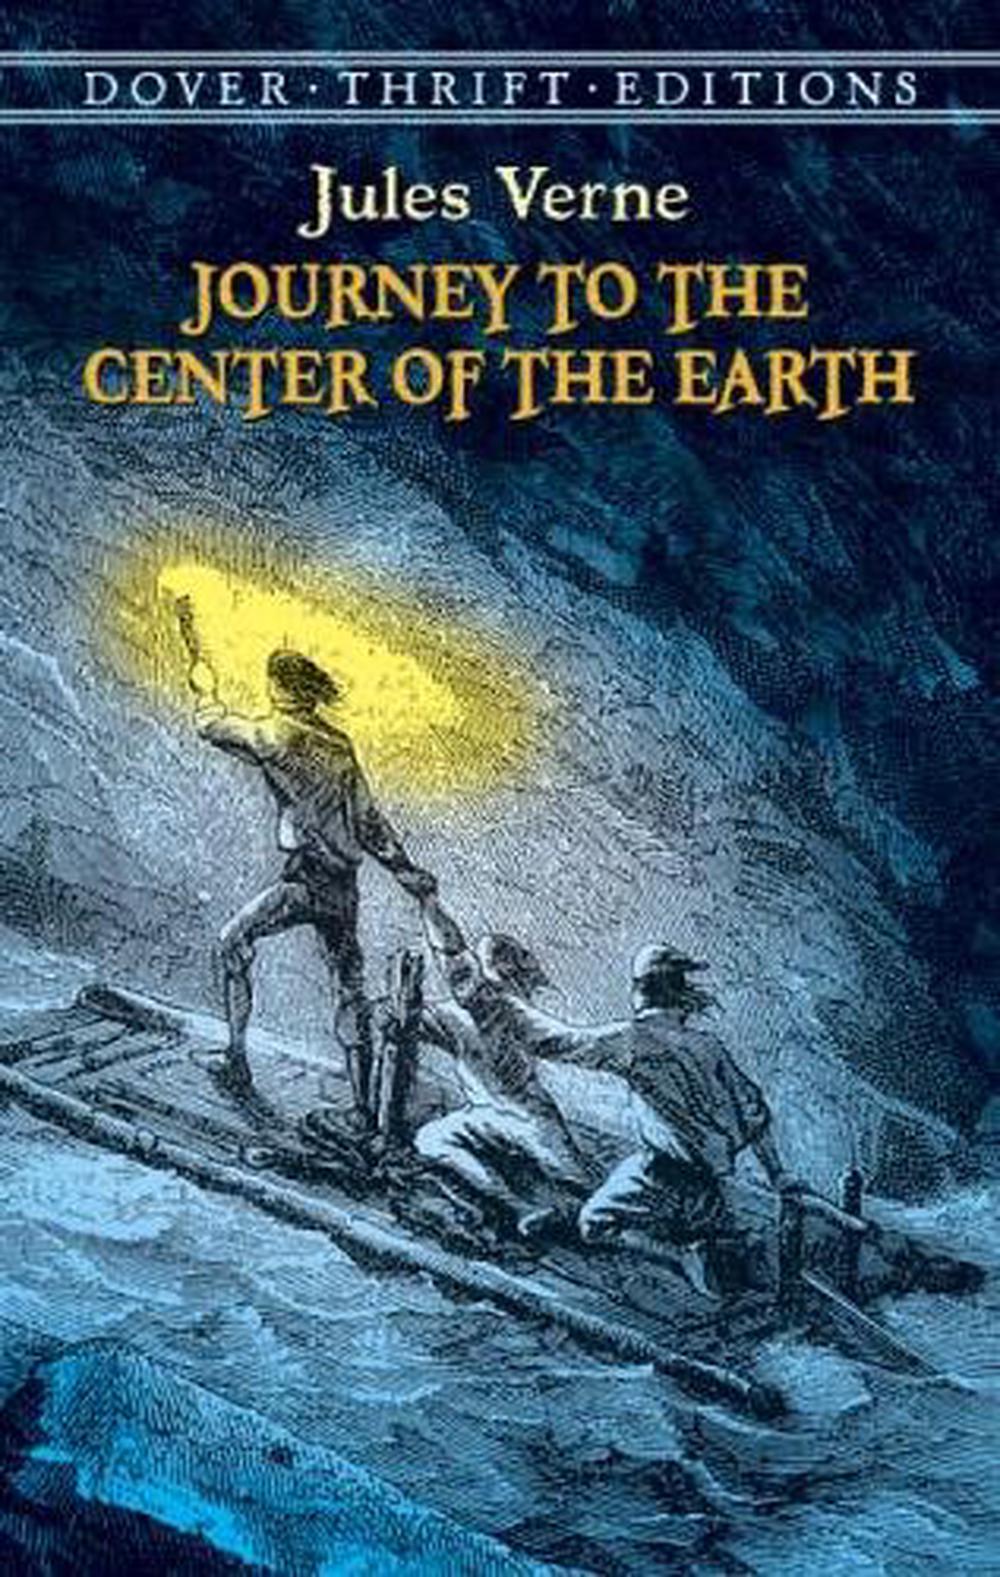 a journey to the center of the earth